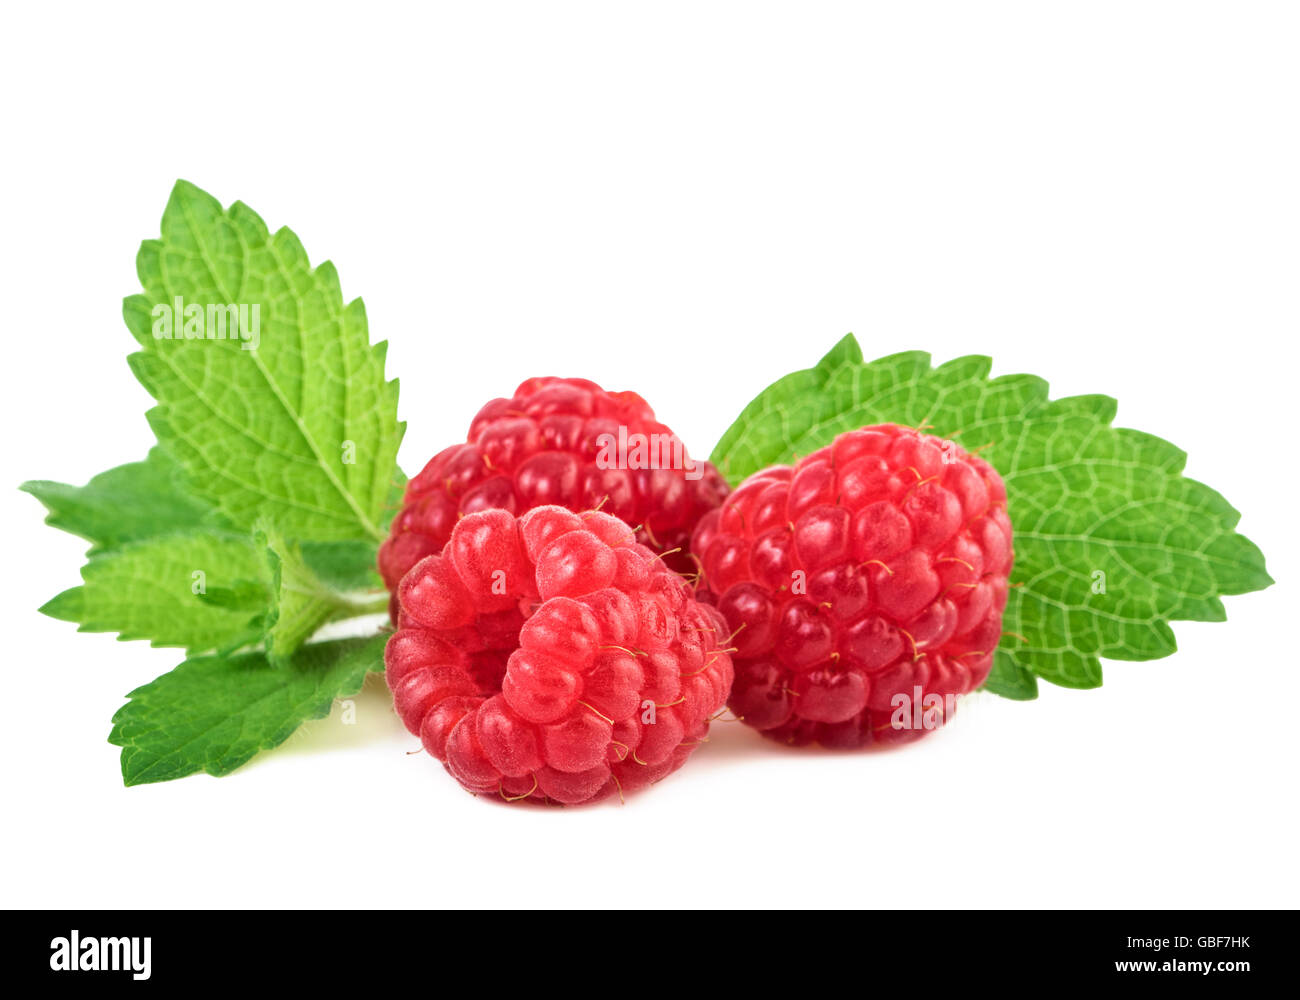 raspberries with mint leaf on white background Stock Photo